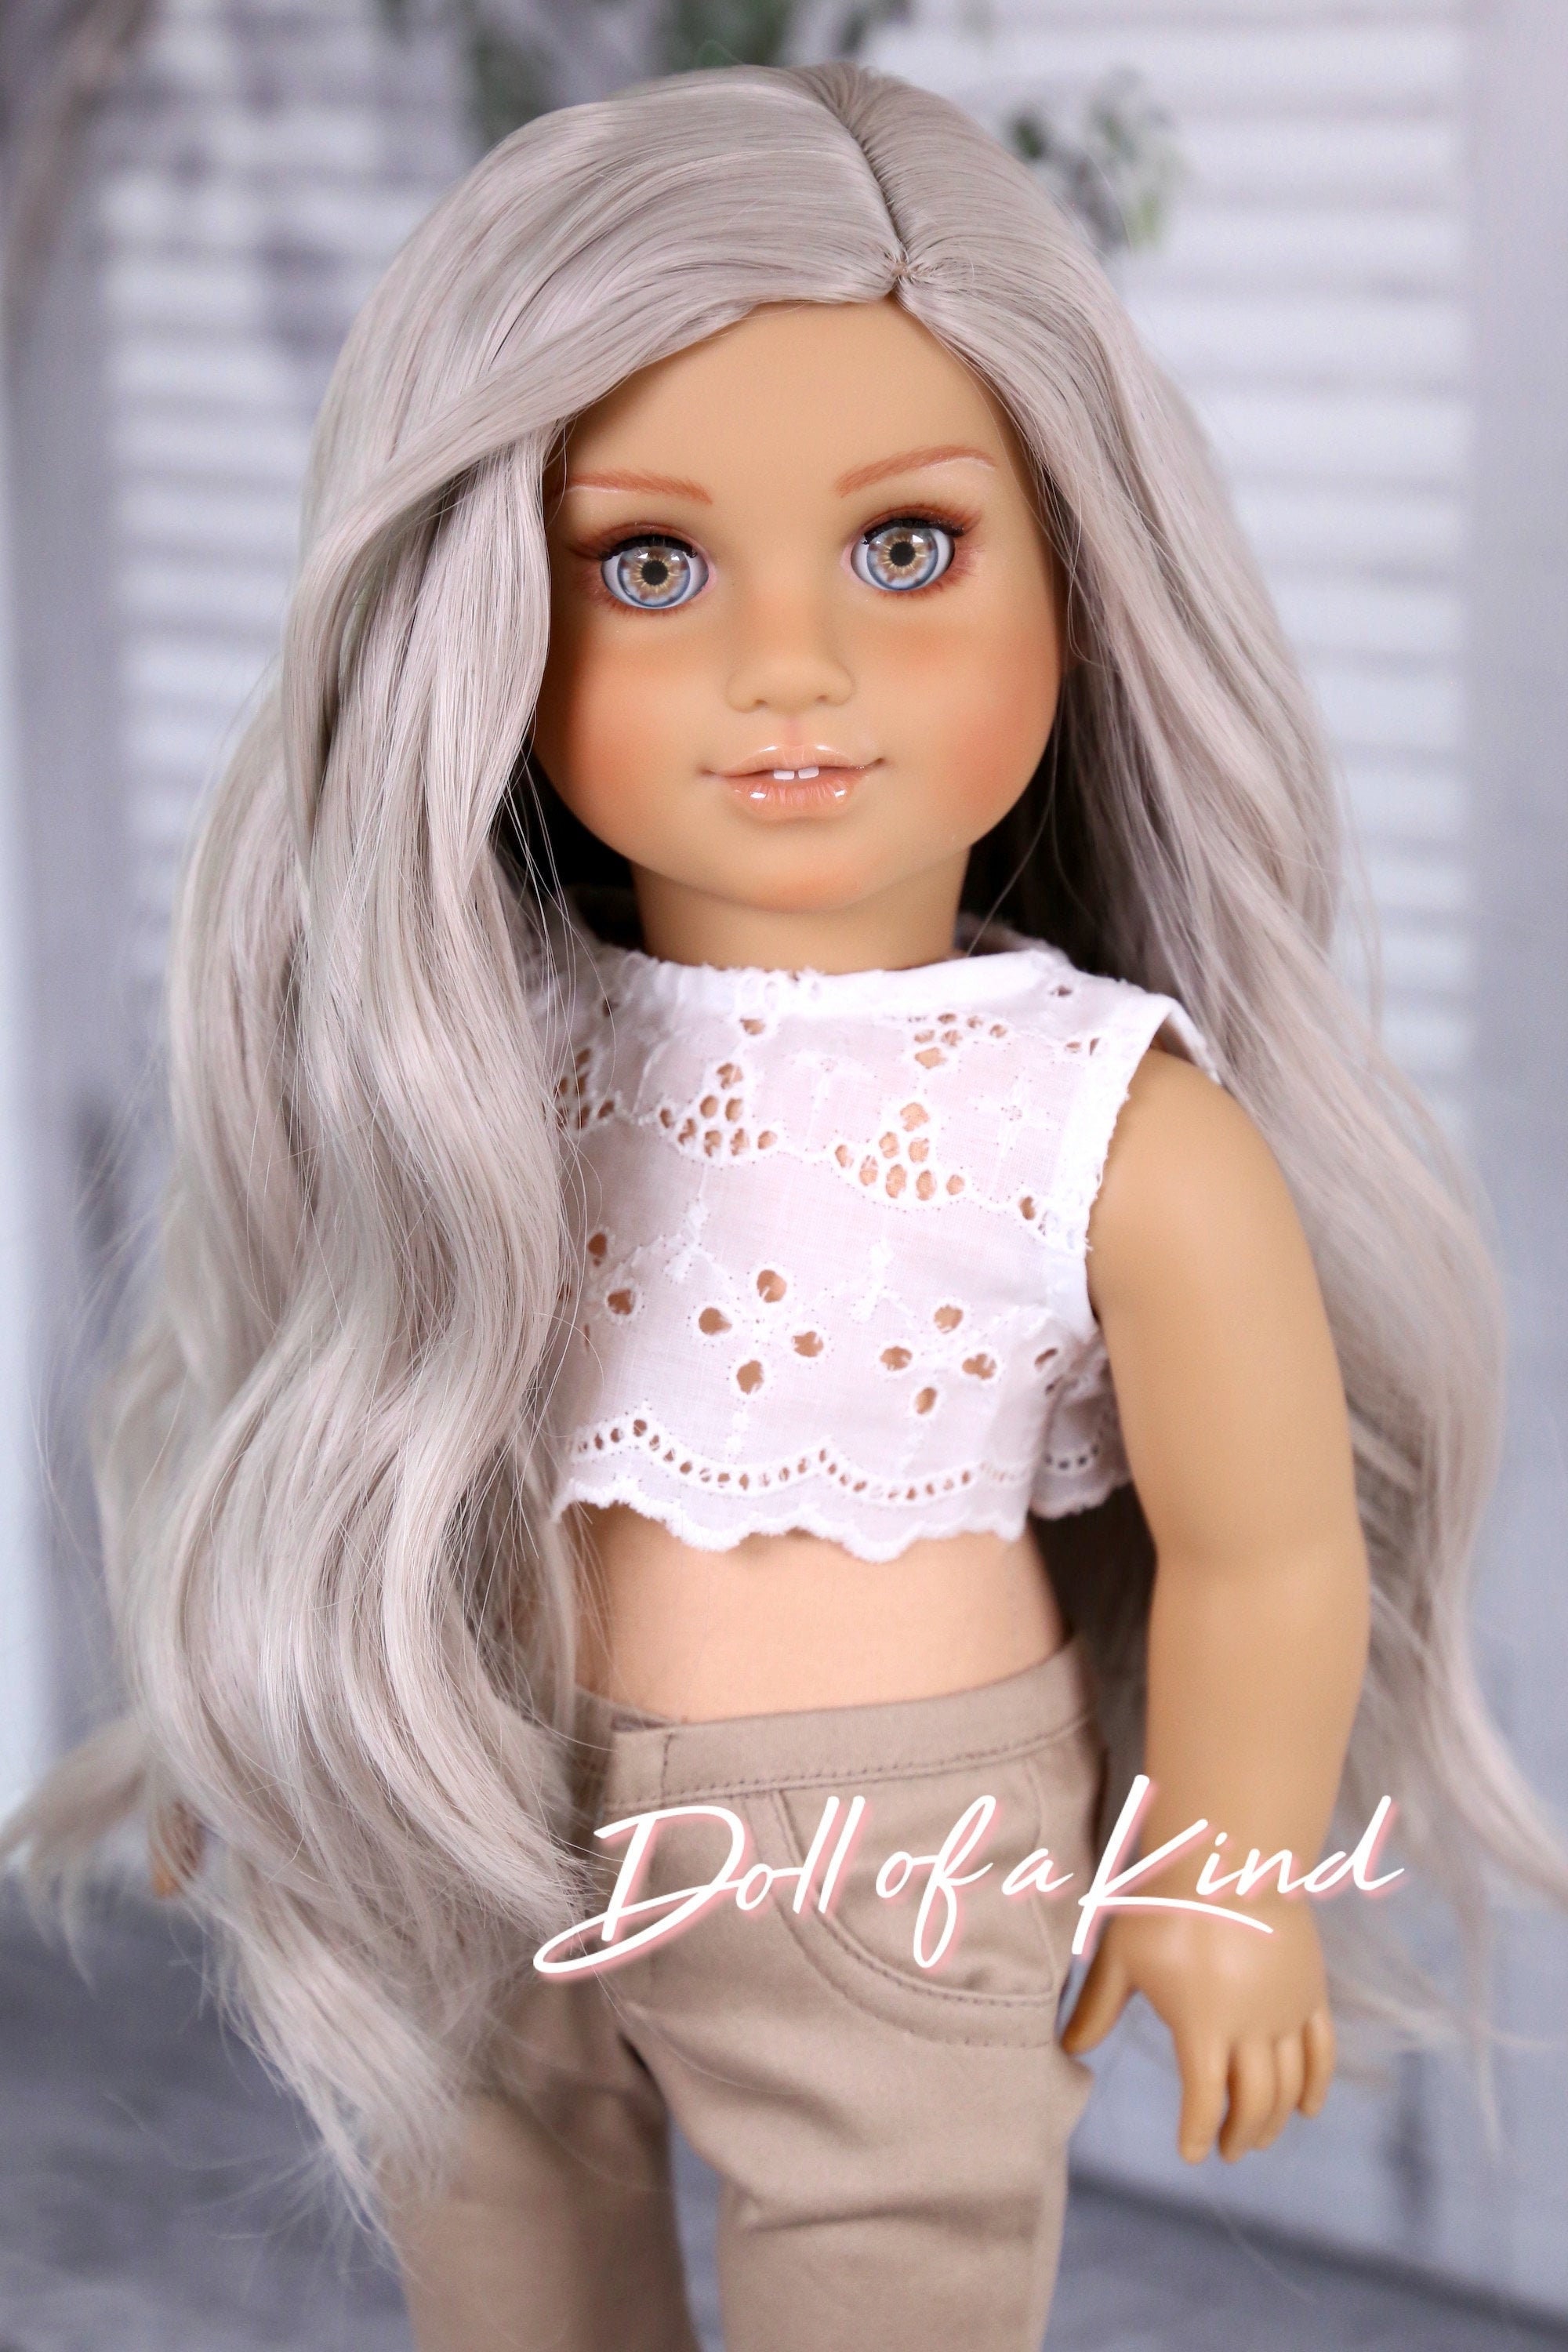 Smart Doll Wigs IRIDIANA , Replacement Doll Wig by Doll of a Kind,fits Most  Doll Head 7.5inch to 8.5 Inch,dollfie,paola Reina, BJD 